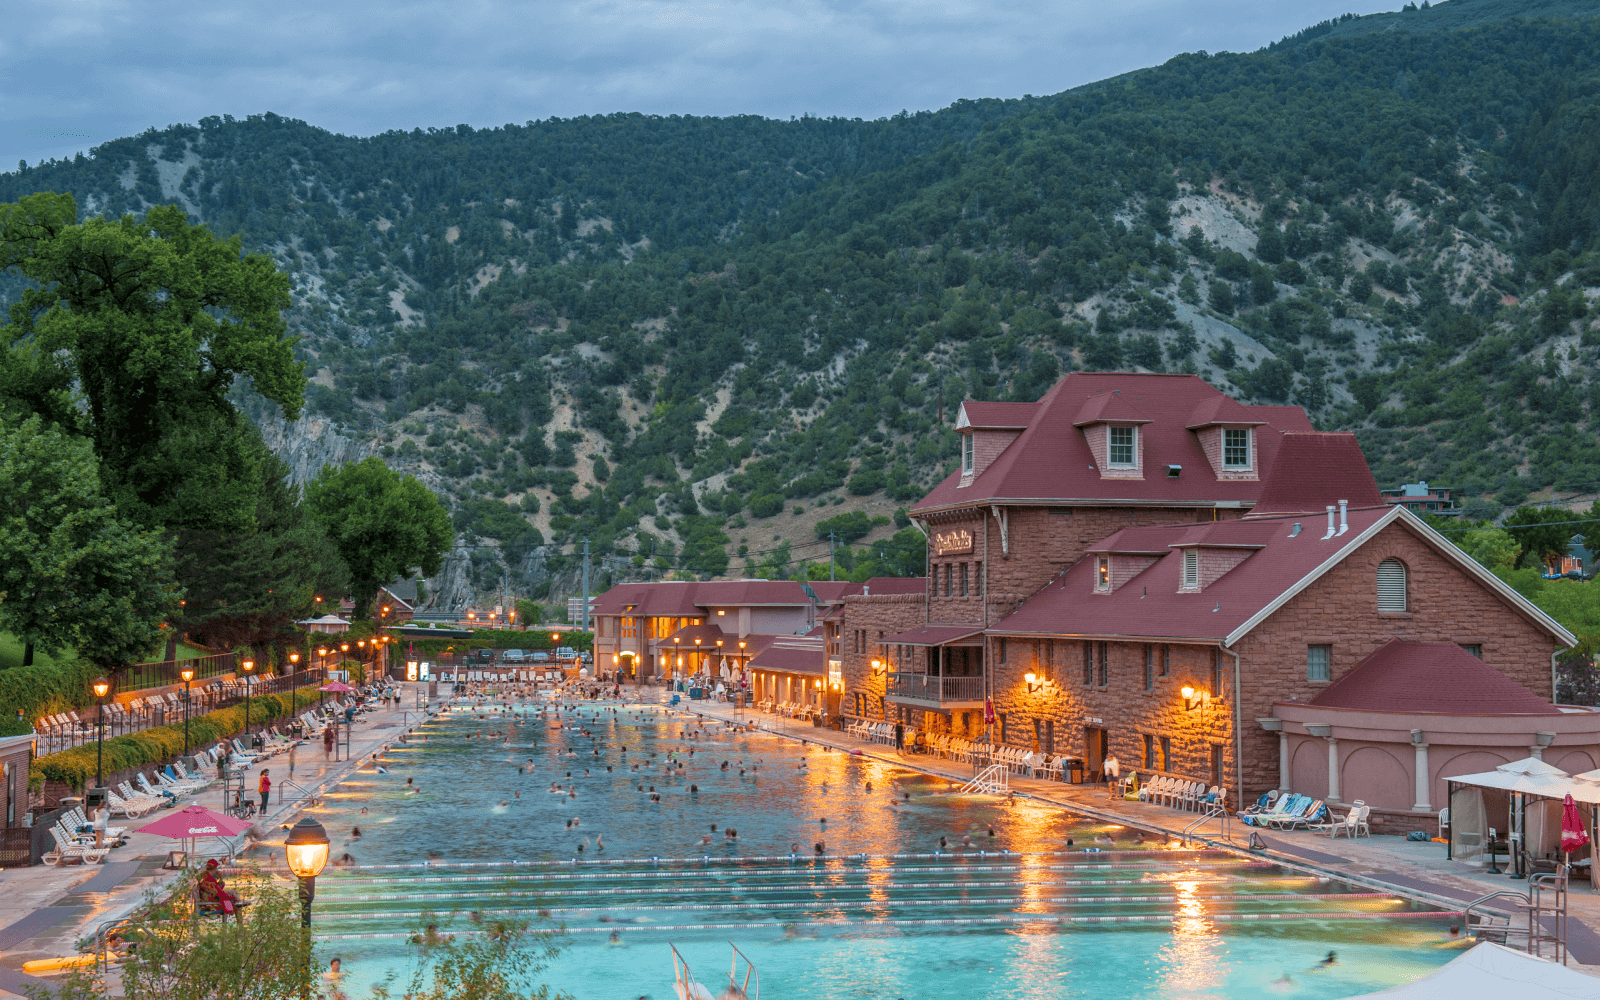 An aerial view of the Glenwood hot springs hotel pool 